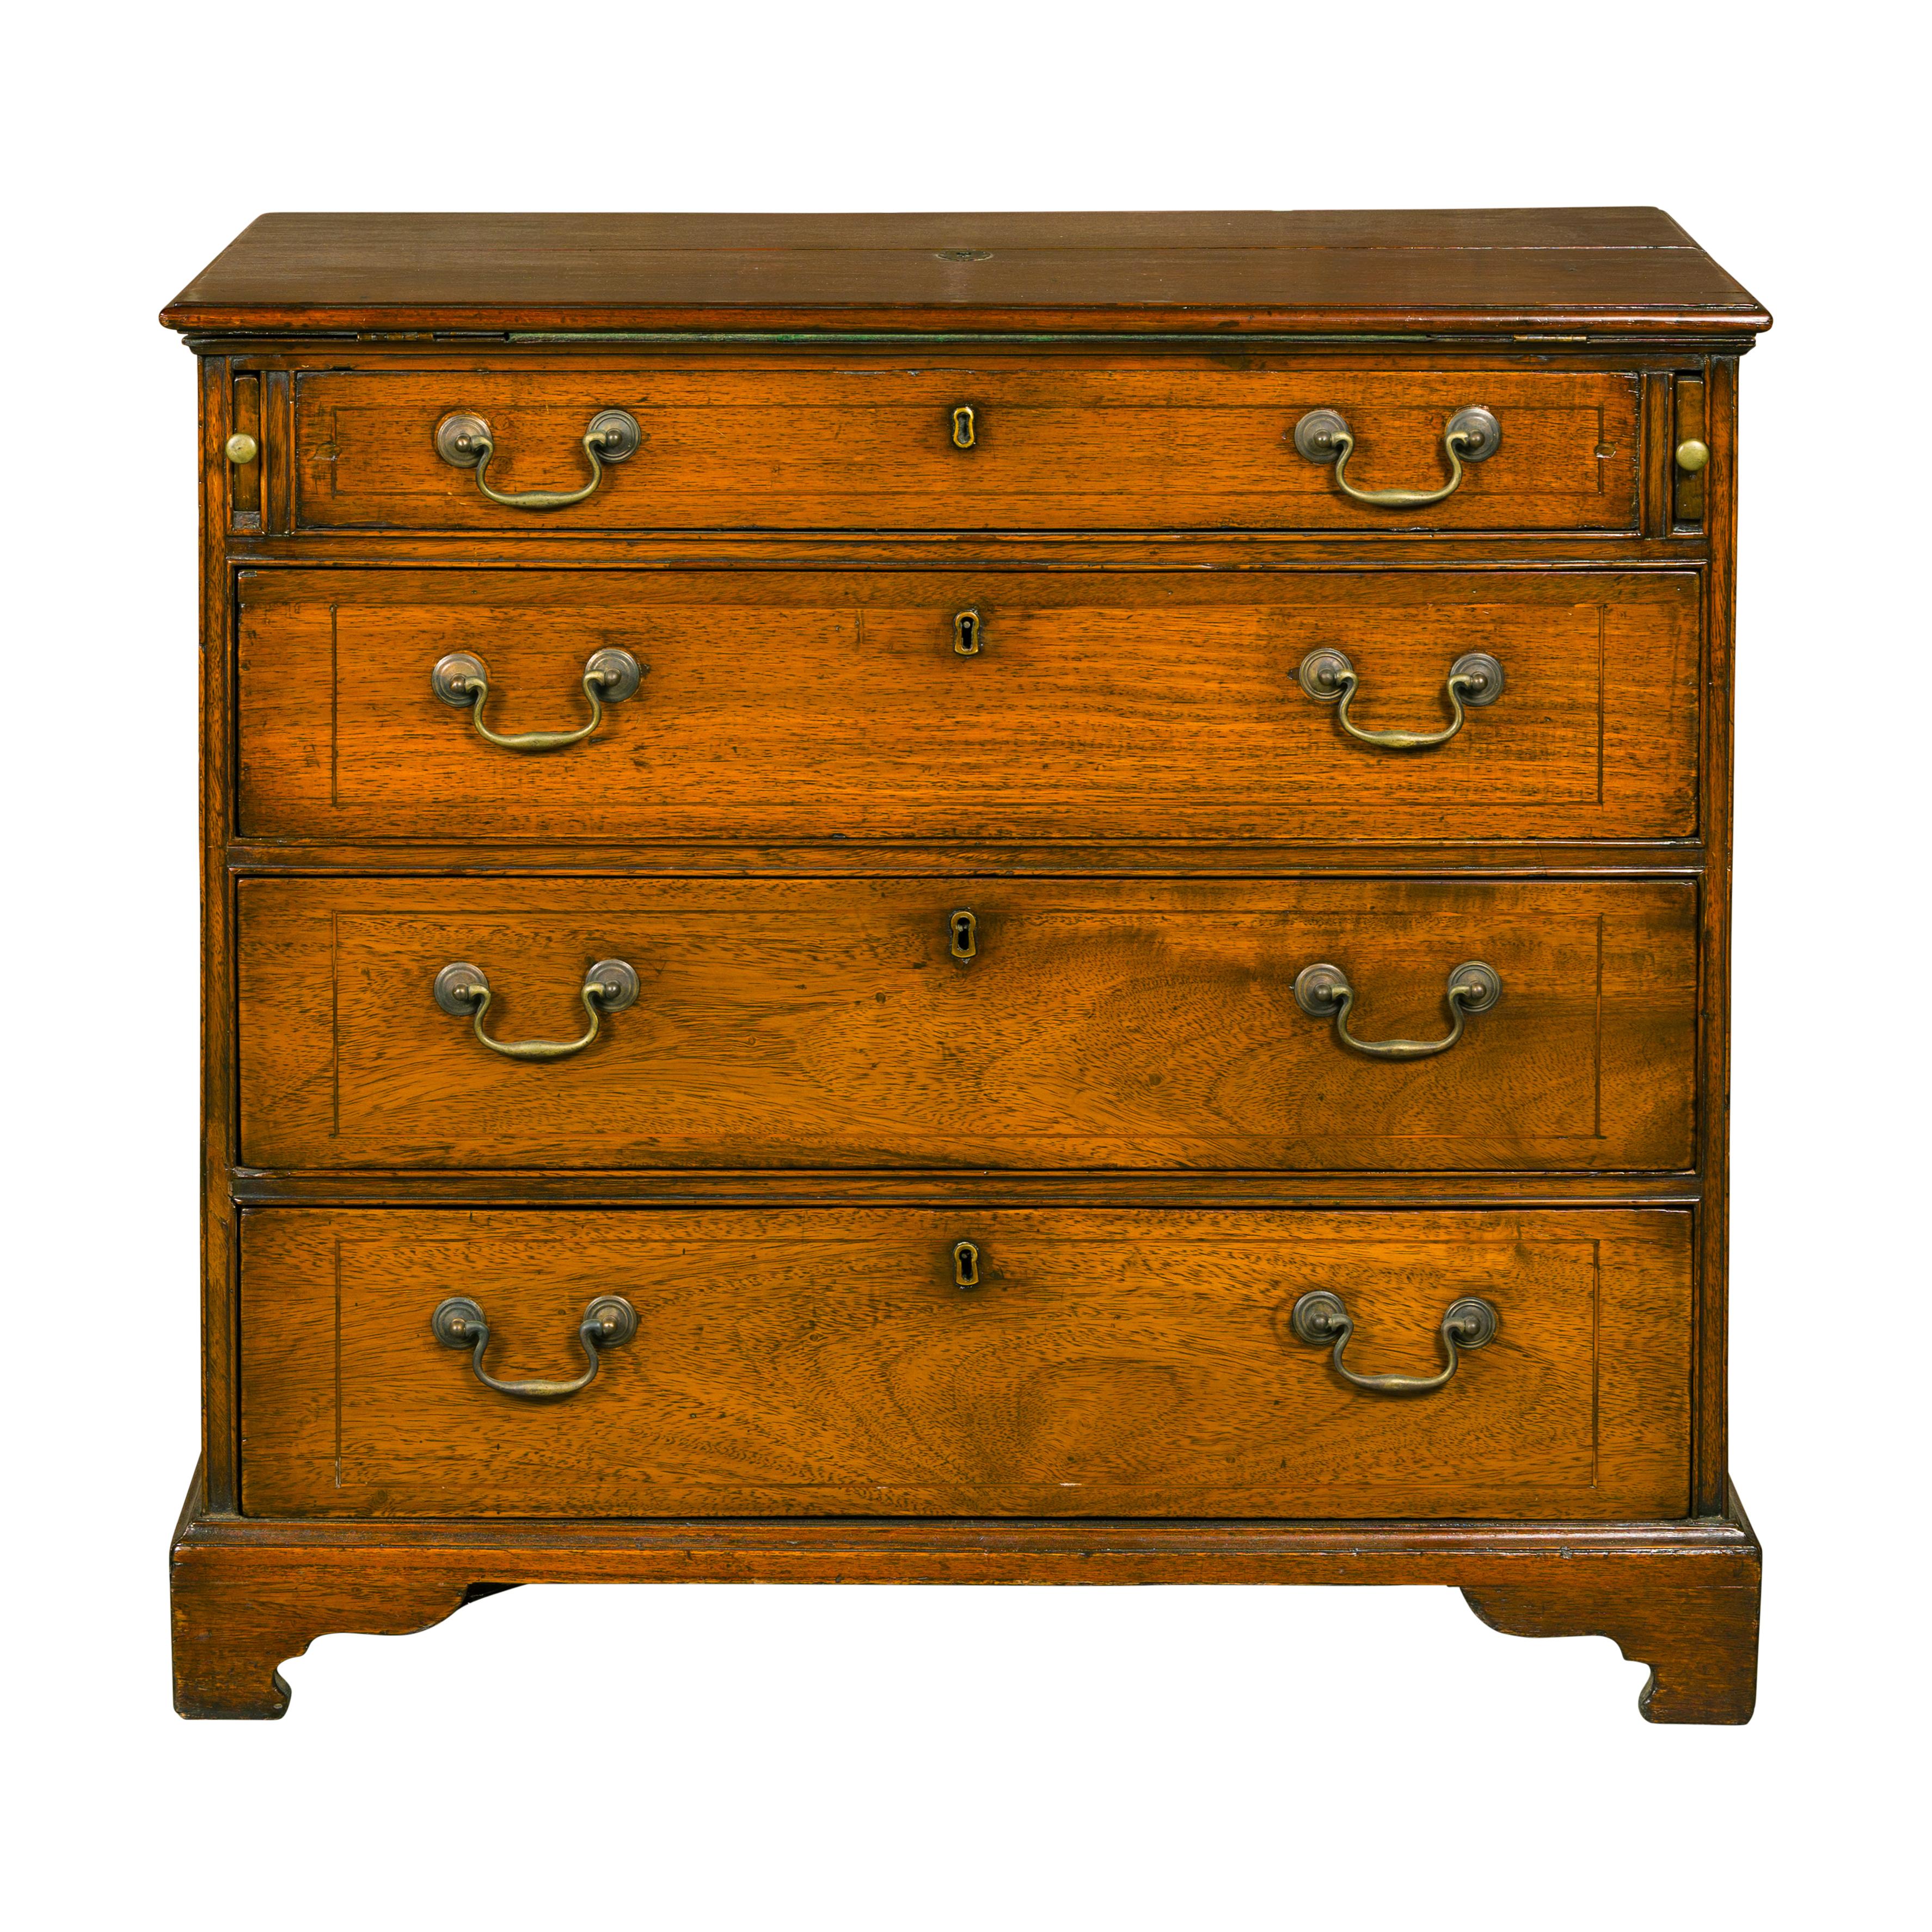 English 19th Century Walnut Campaign Butler's Desk with Three Drawers For Sale 14